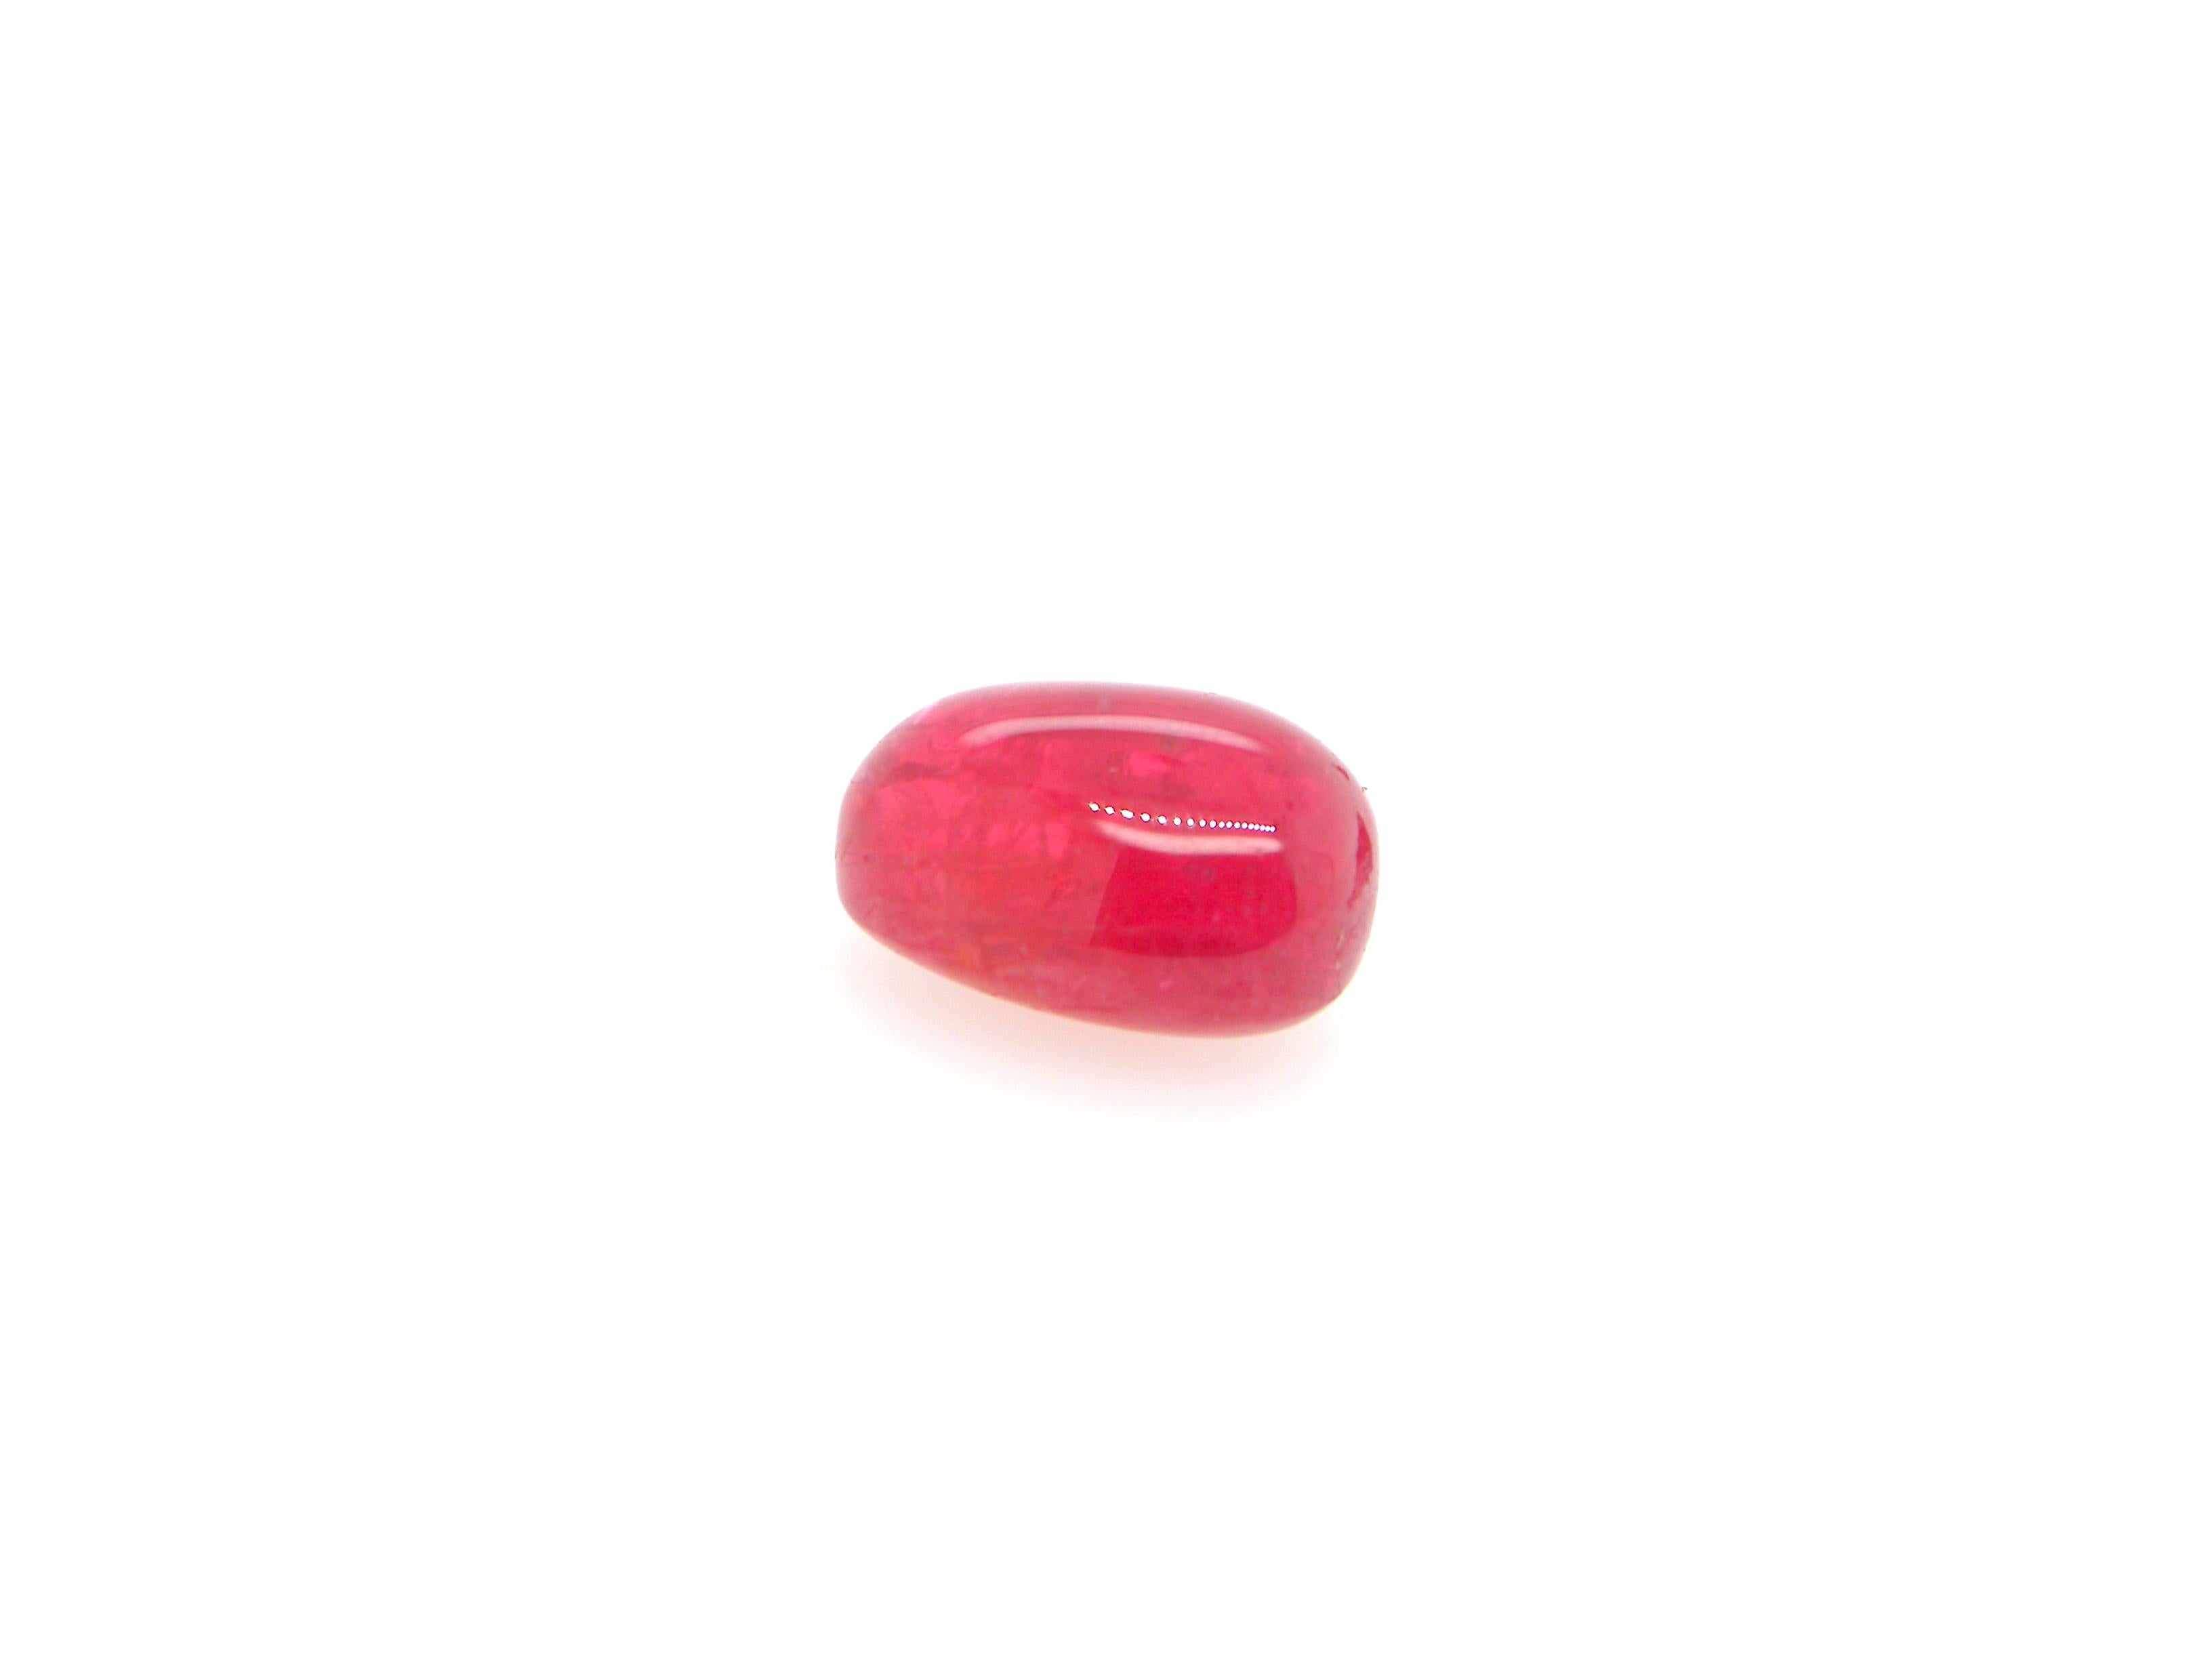 12 Carat Burma No Heat Red Spinel Cabochon For Sale 3